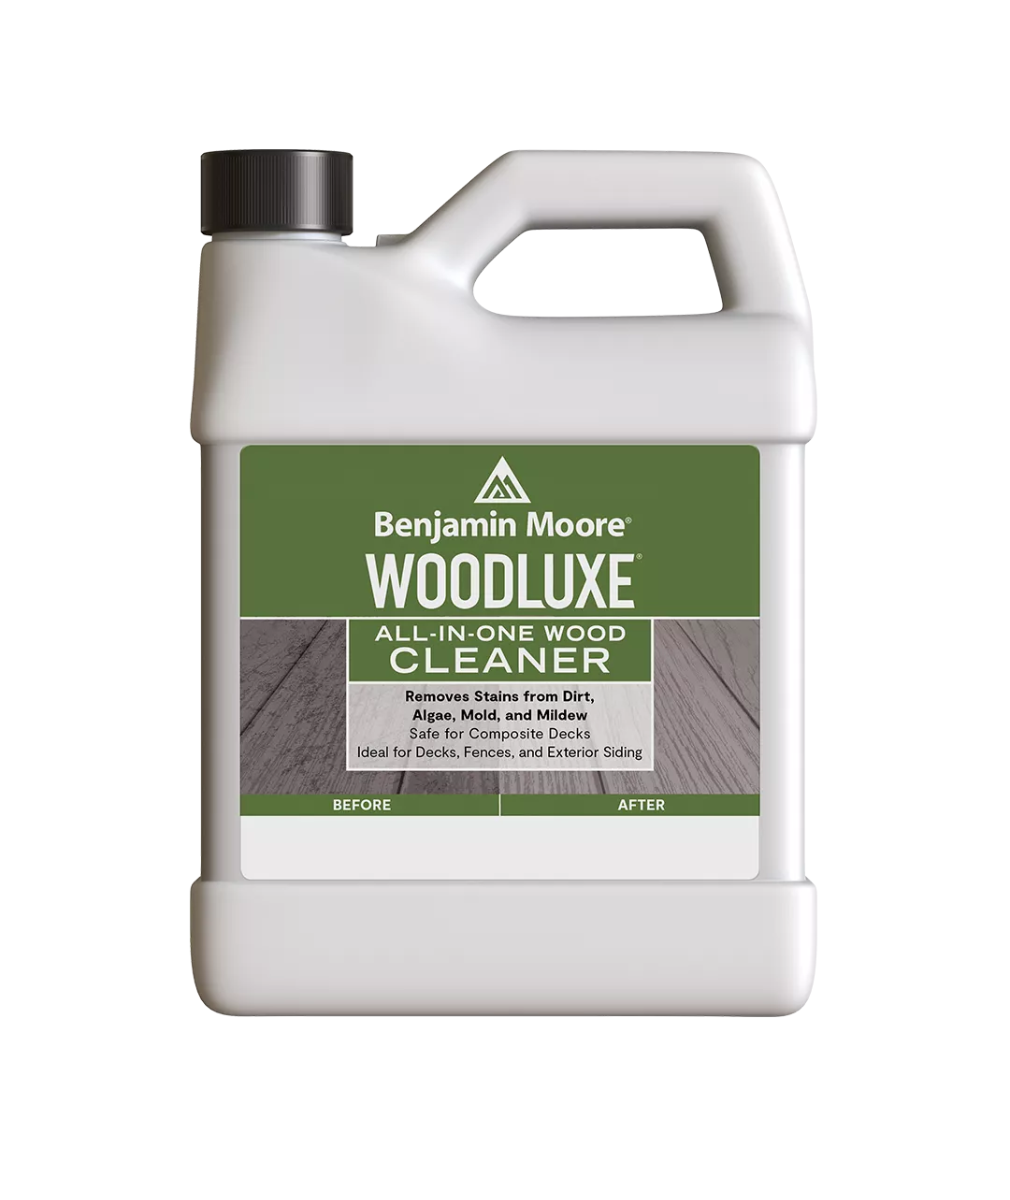 Benjamin Moore Woodluxe Wood Cleaner Gallon available to shop at Wallauers.